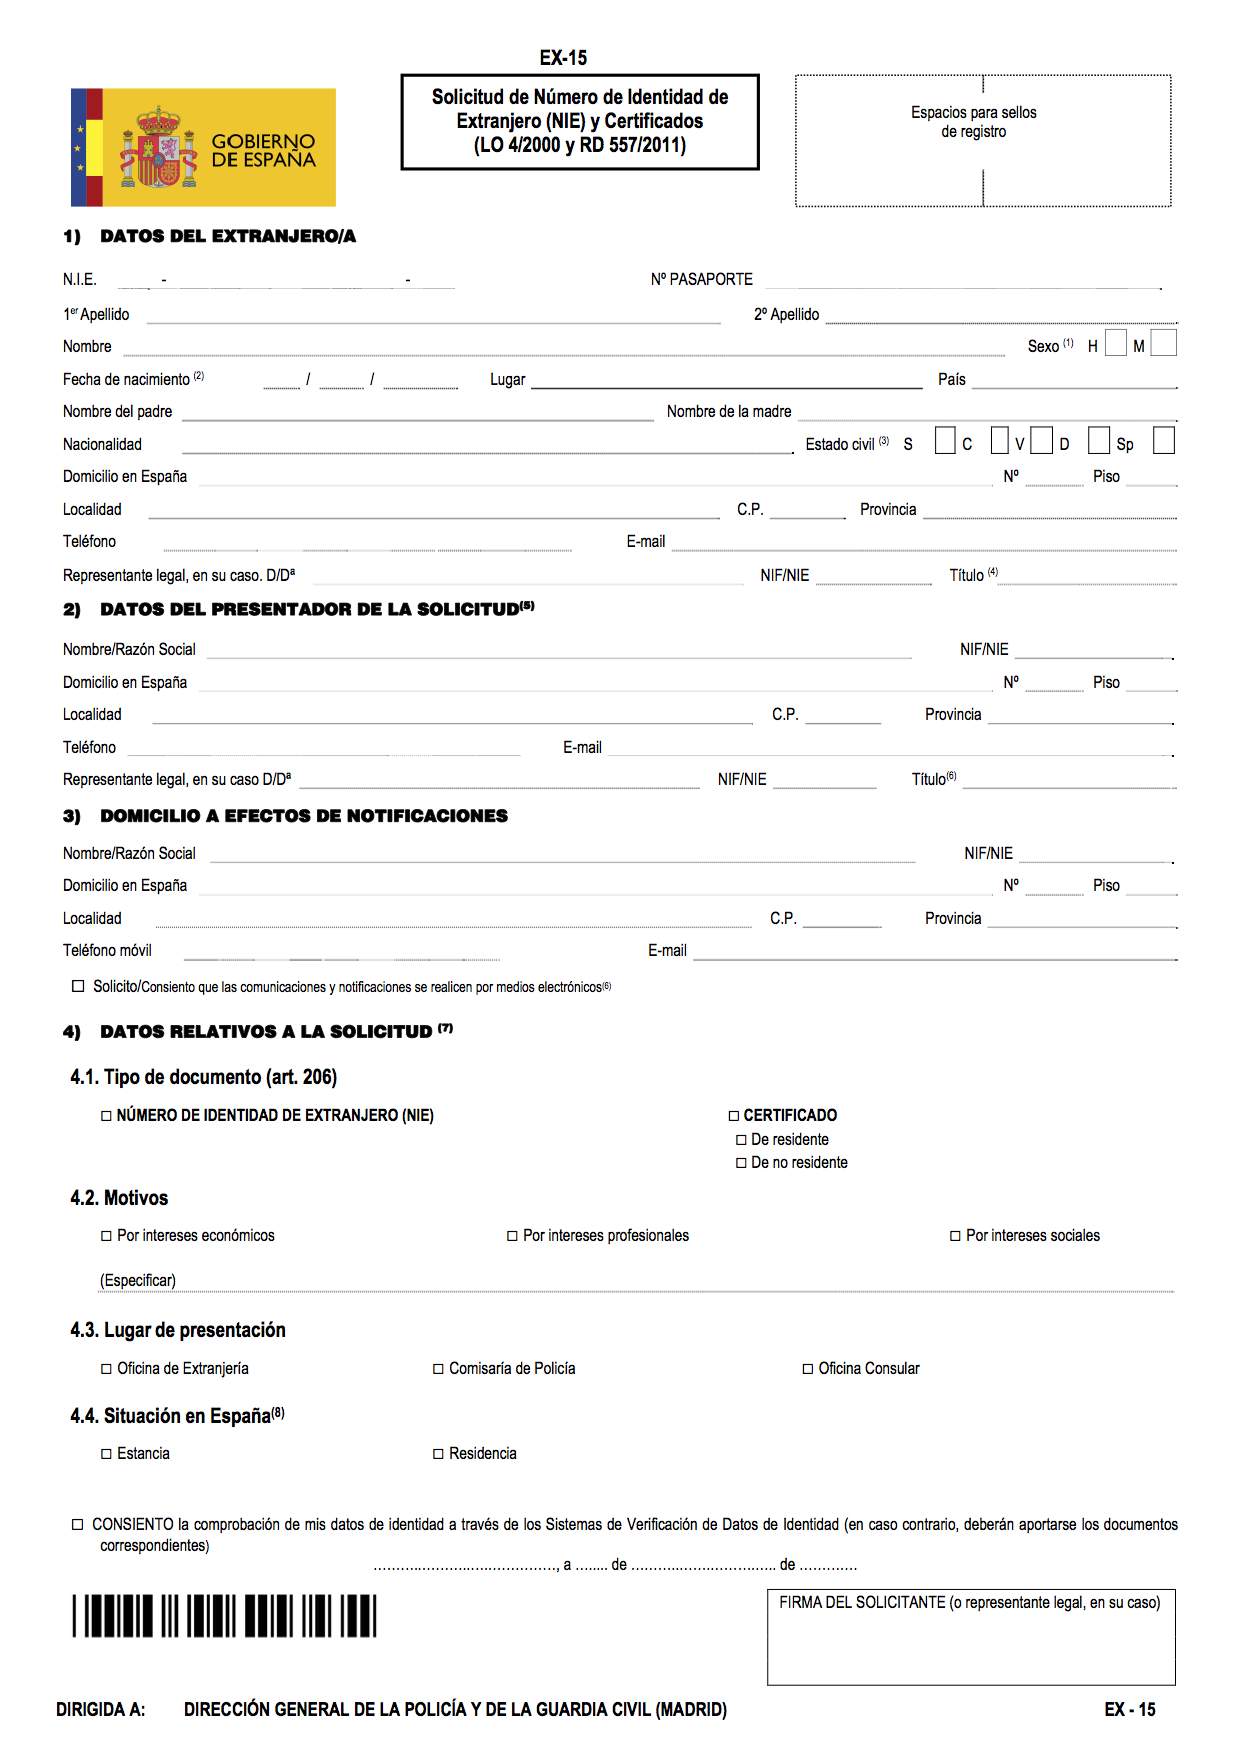 NIE-ex15 form How to Get Your NIE Number in Barcelona, Spain - An Expat's Guide